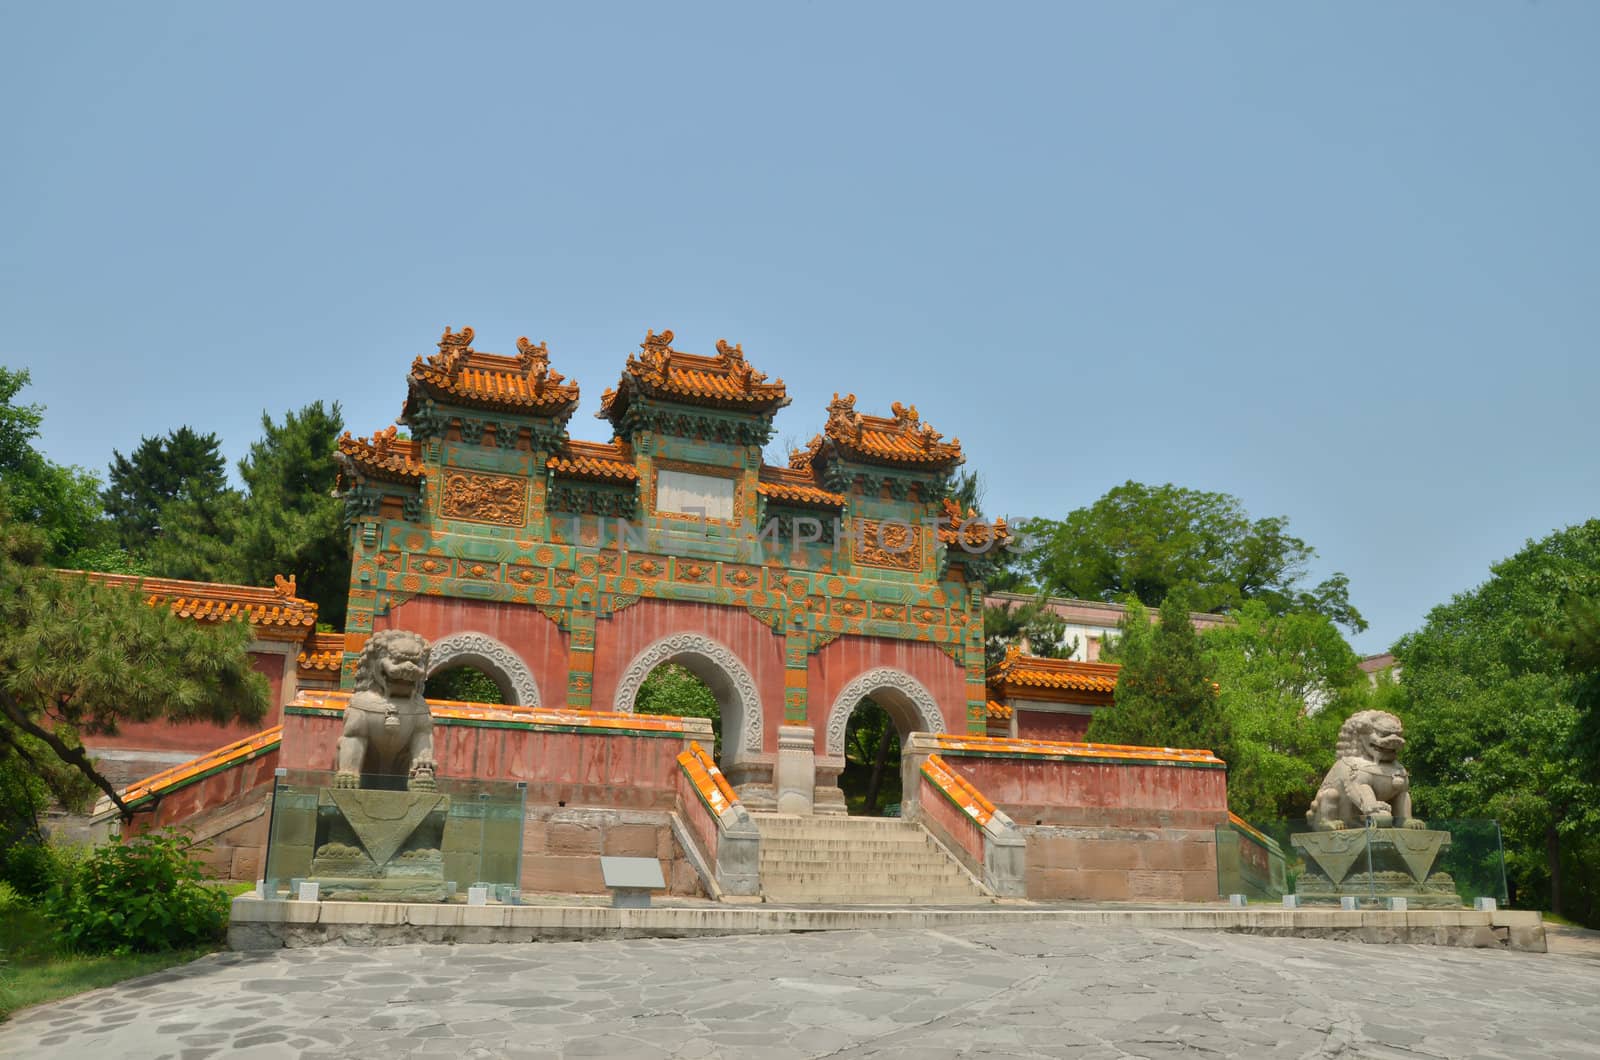 Part of touristic atractions in Chengde in China. Ancient gate to the temples.